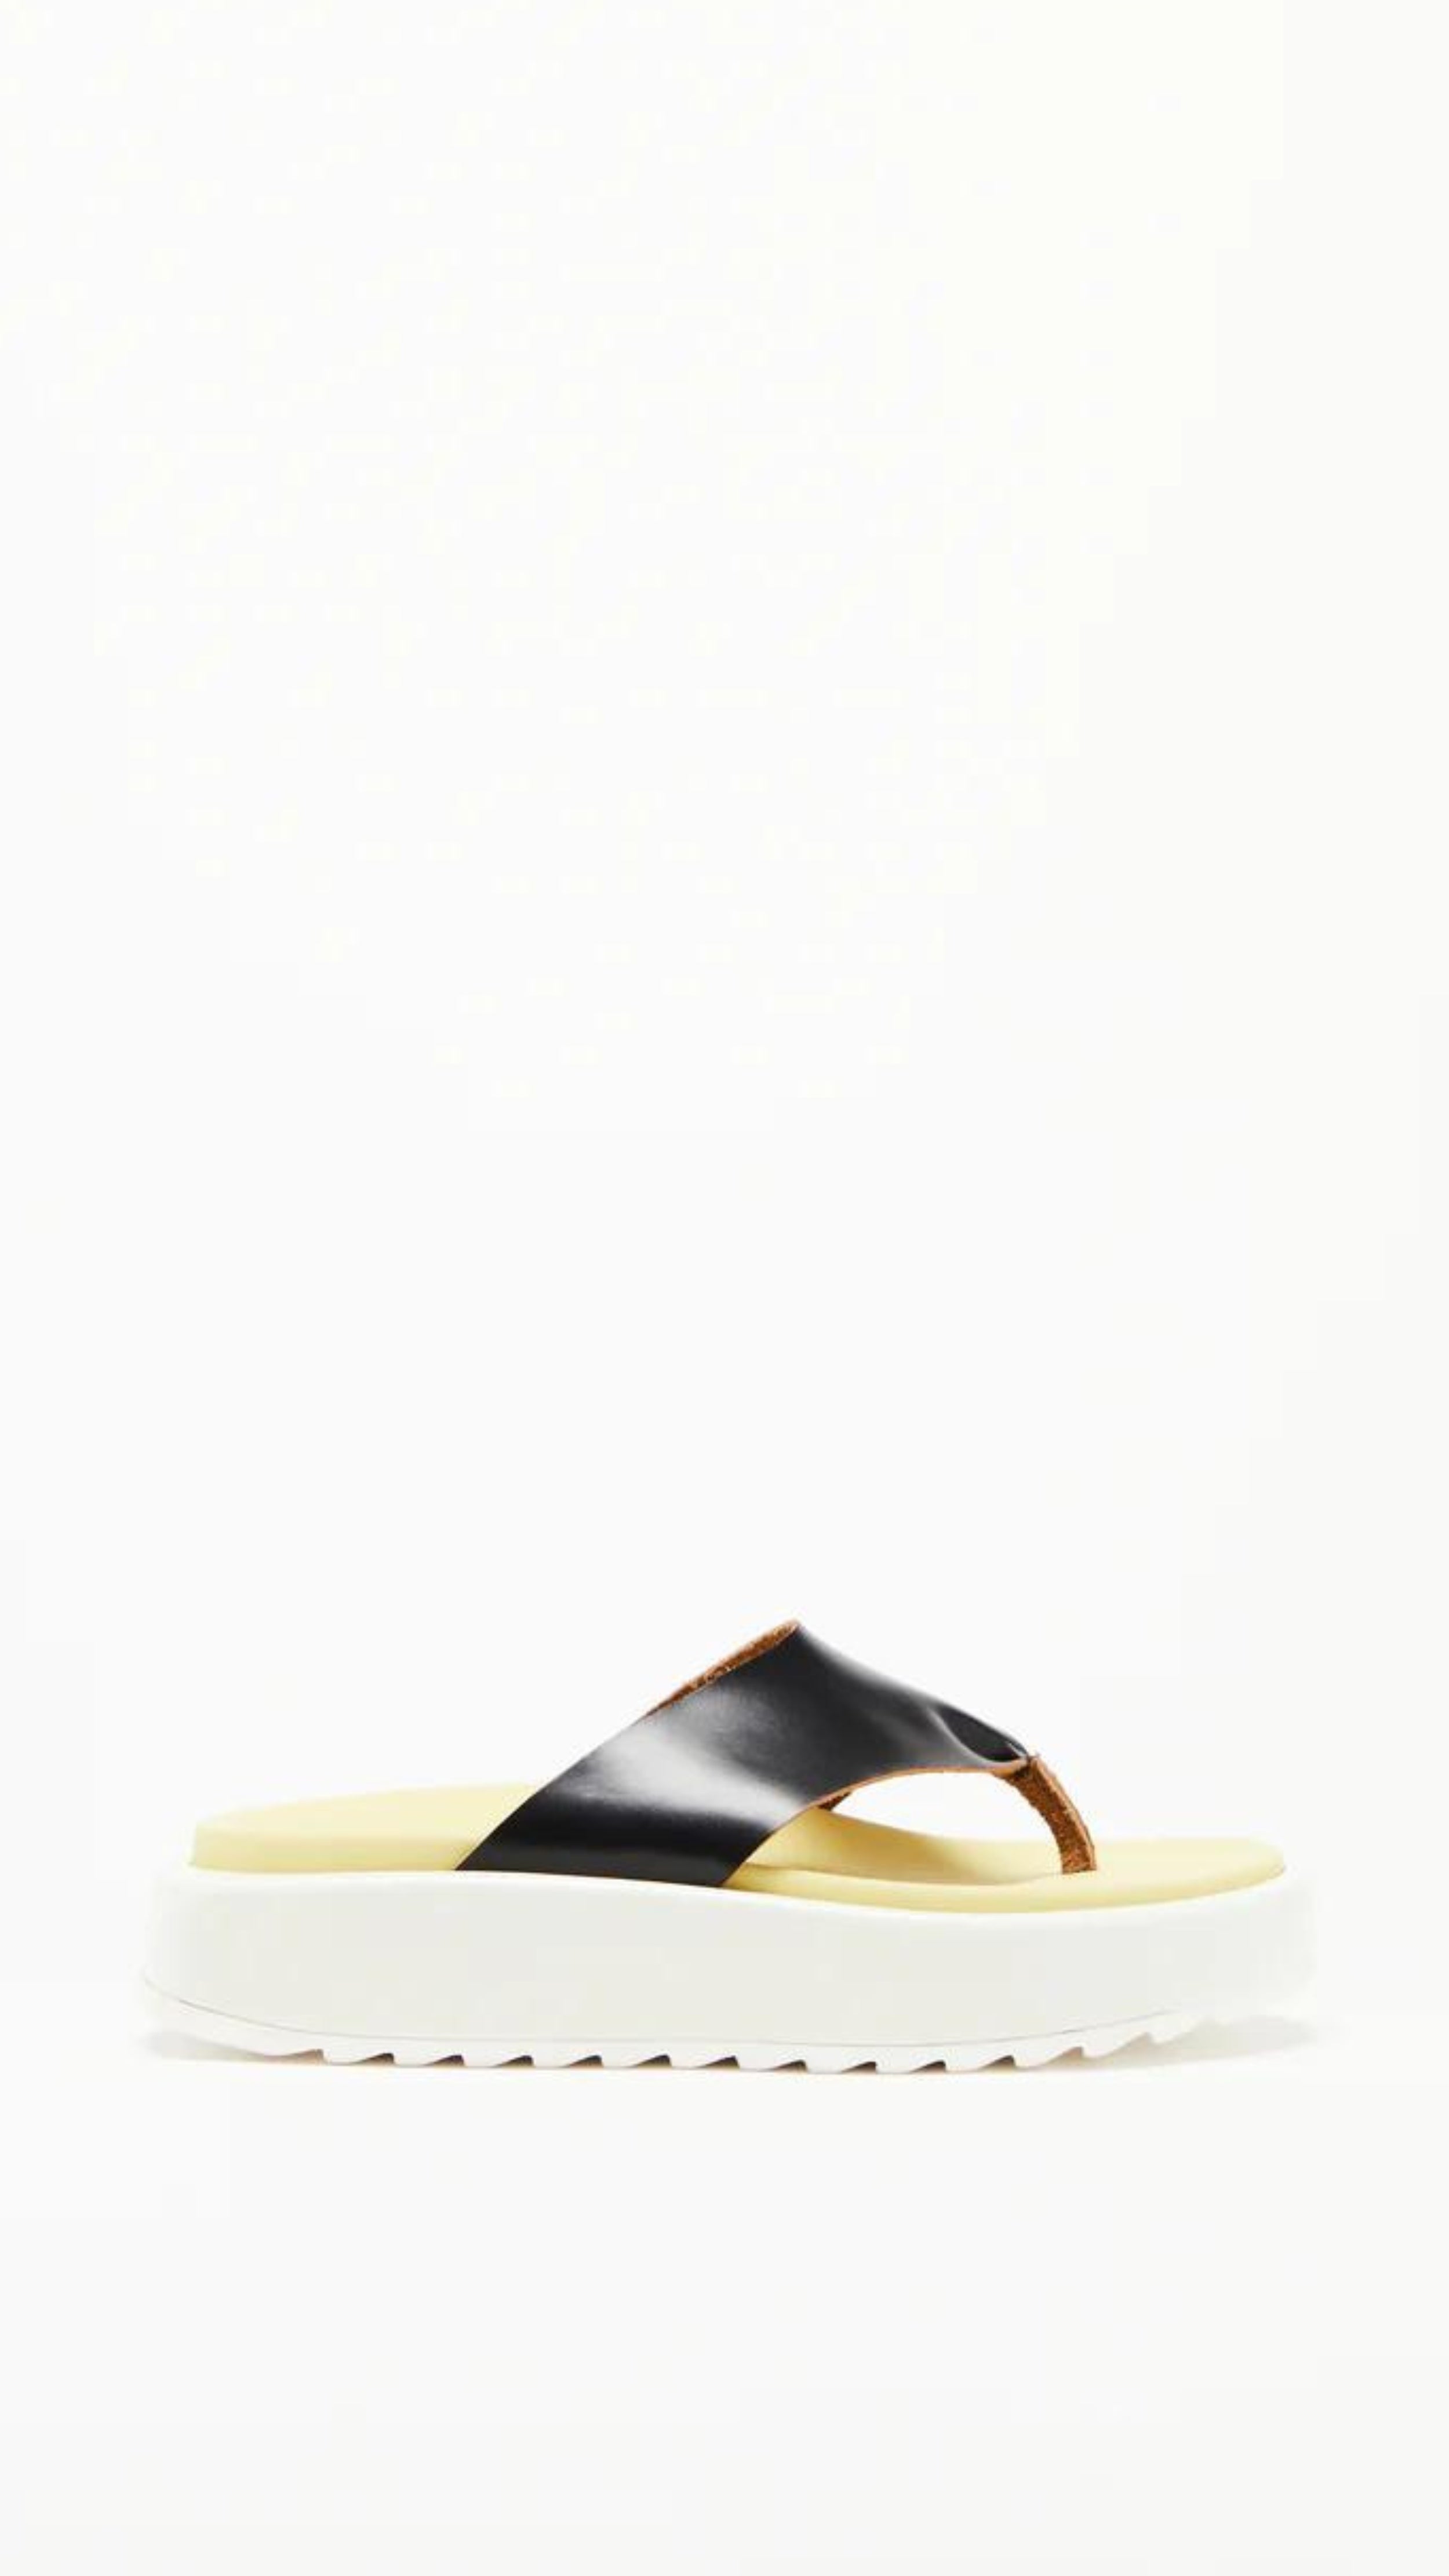 Plan C Platform Thong Sandal. Made in Italy the thong leather detail is in black with the sole interior in a pale yellow. With a slight platform, the outer edges are in white. Photo shown from the side.